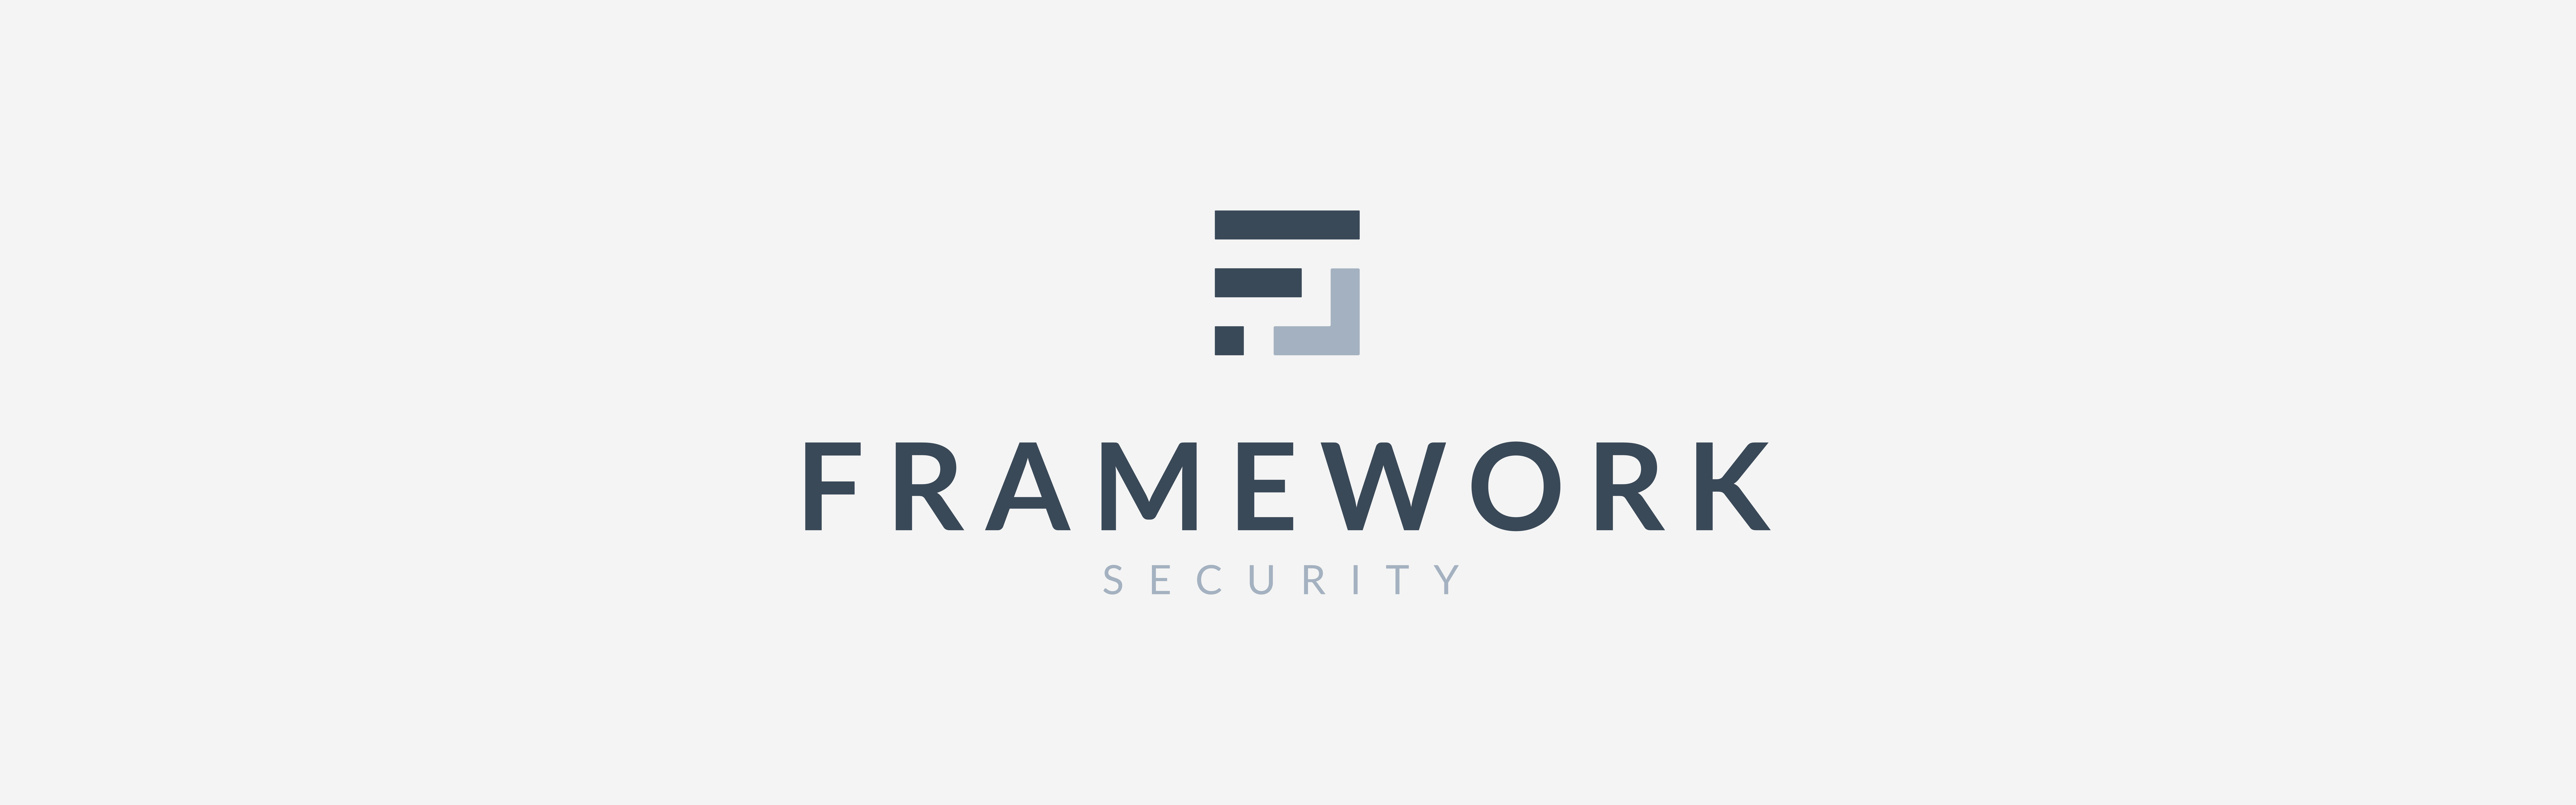 Logo of "Framework Security" featuring an abstract design resembling a shield with layered elements above the company name in a sans-serif typeface.